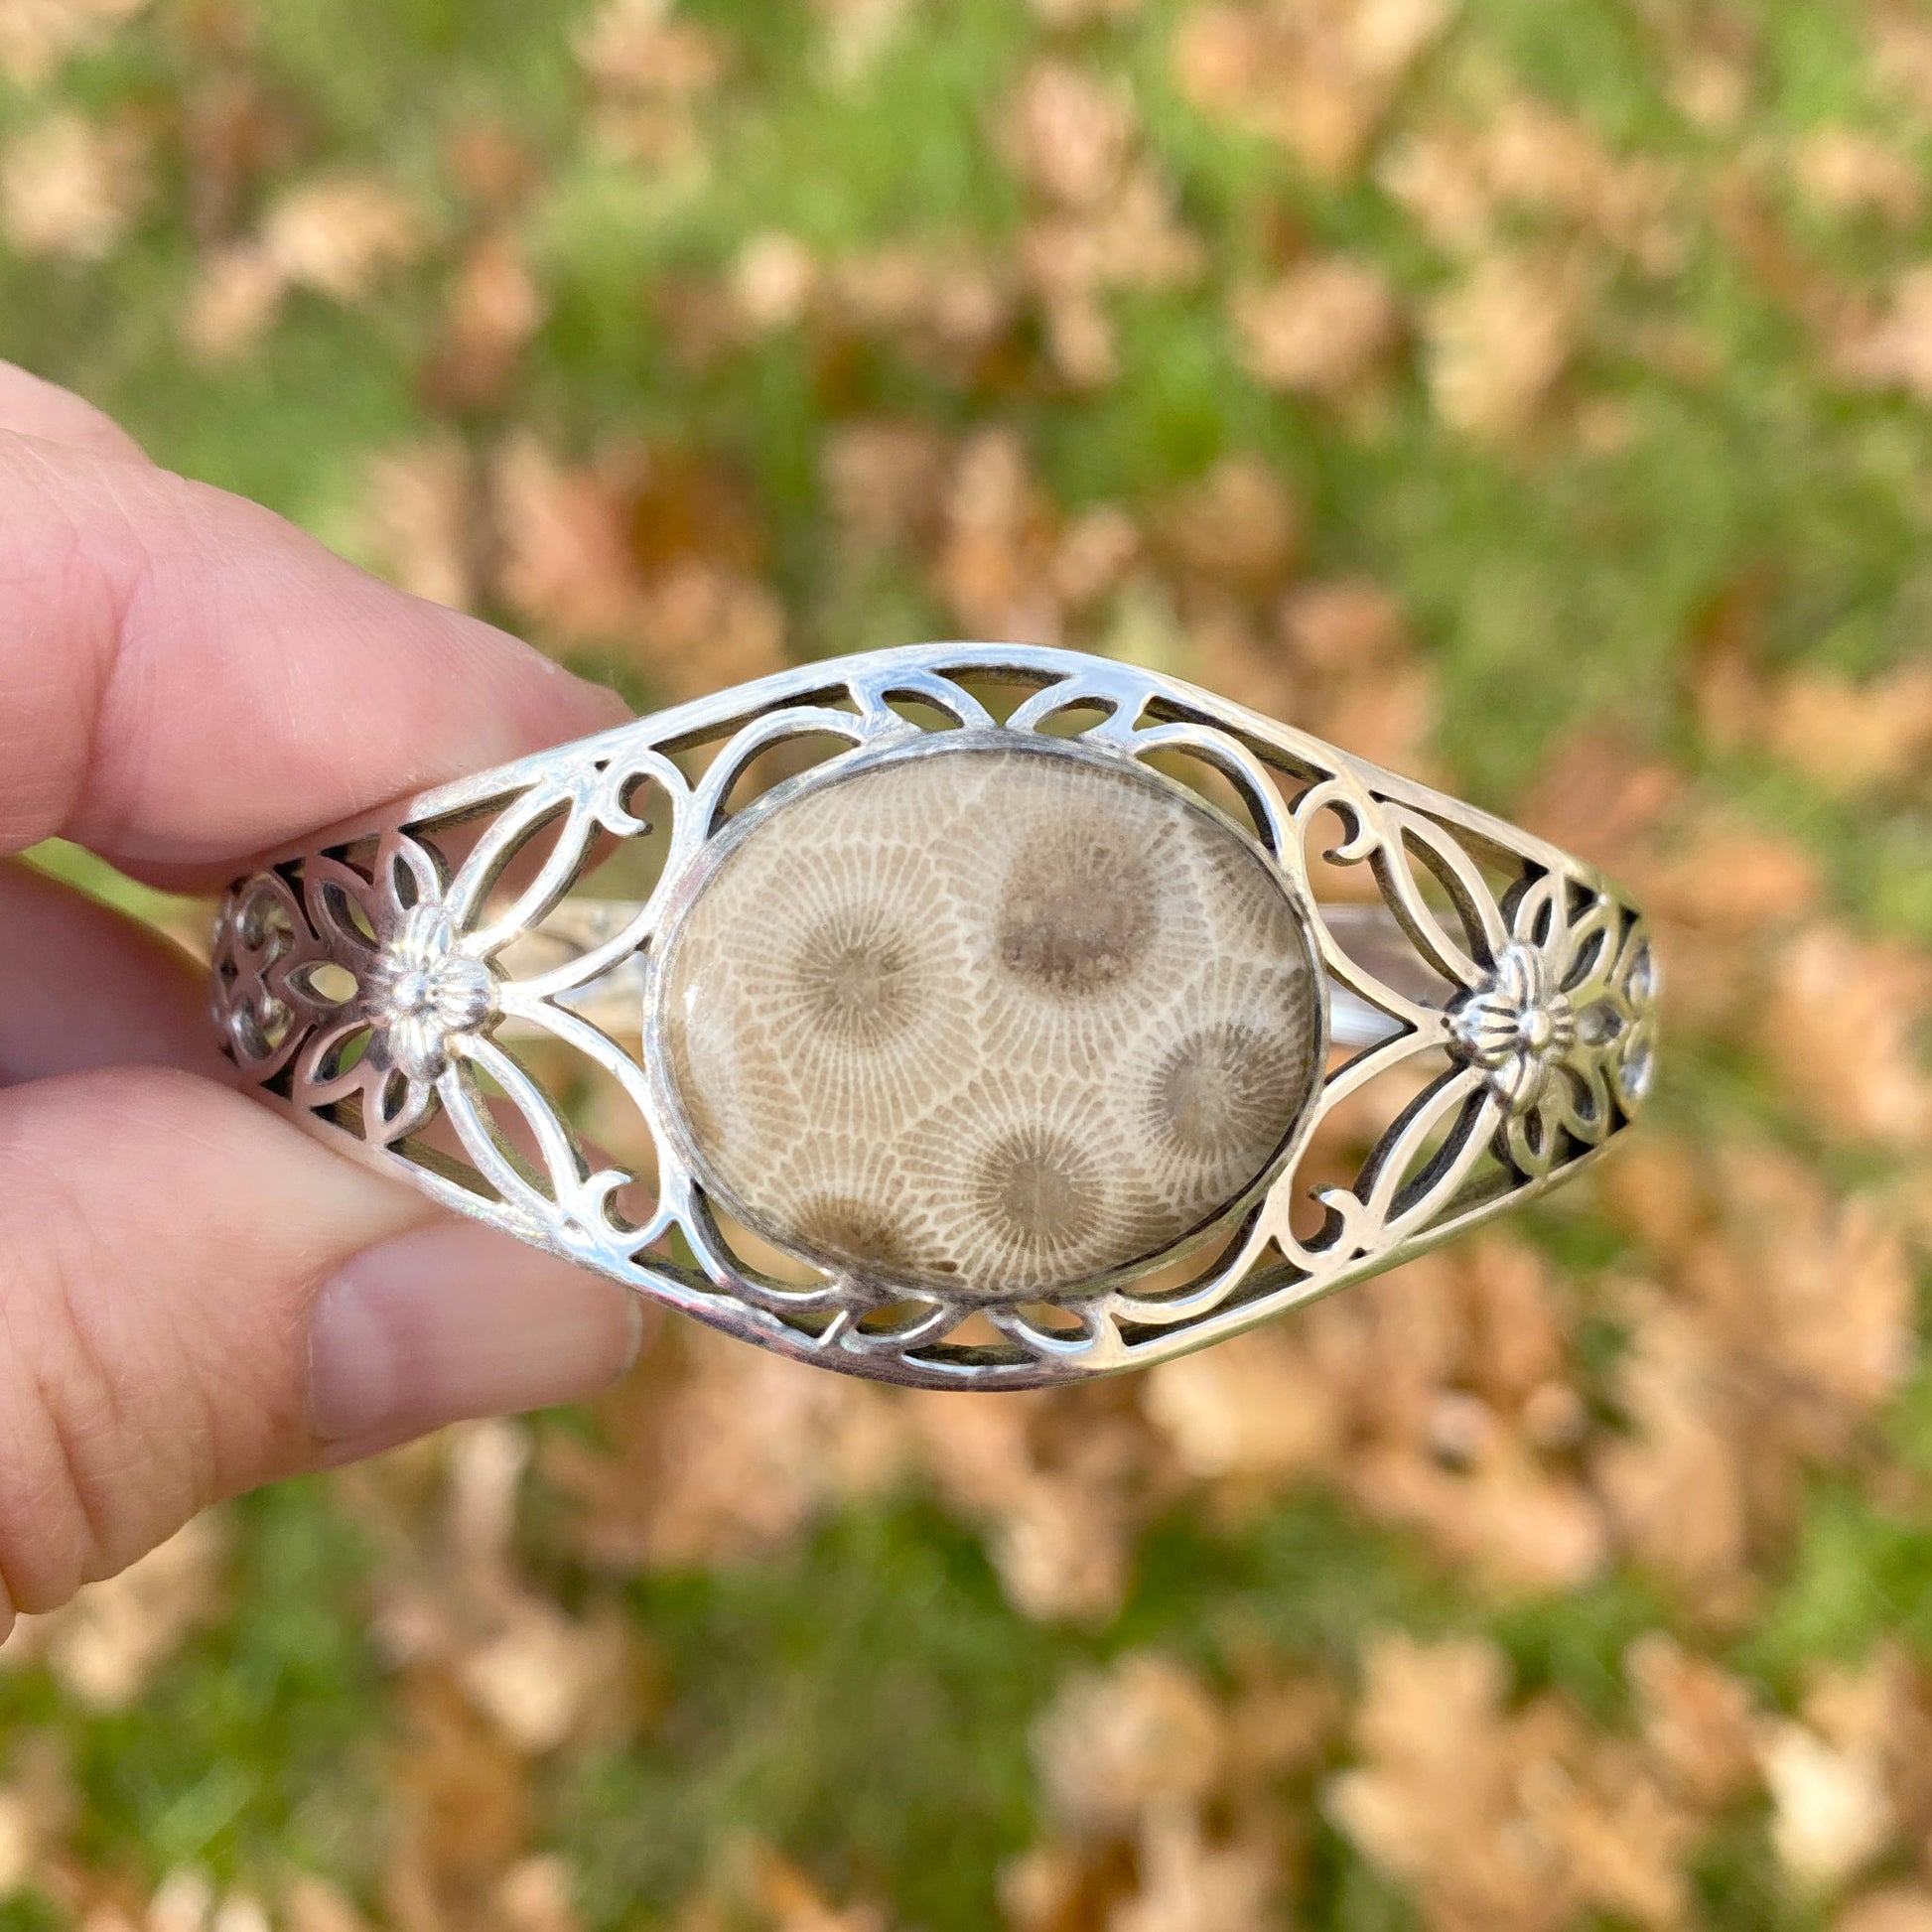 Petoskey Stone Cuff Bracelet Front View Outside Natural Lighting - Stone Treasures by the Lake